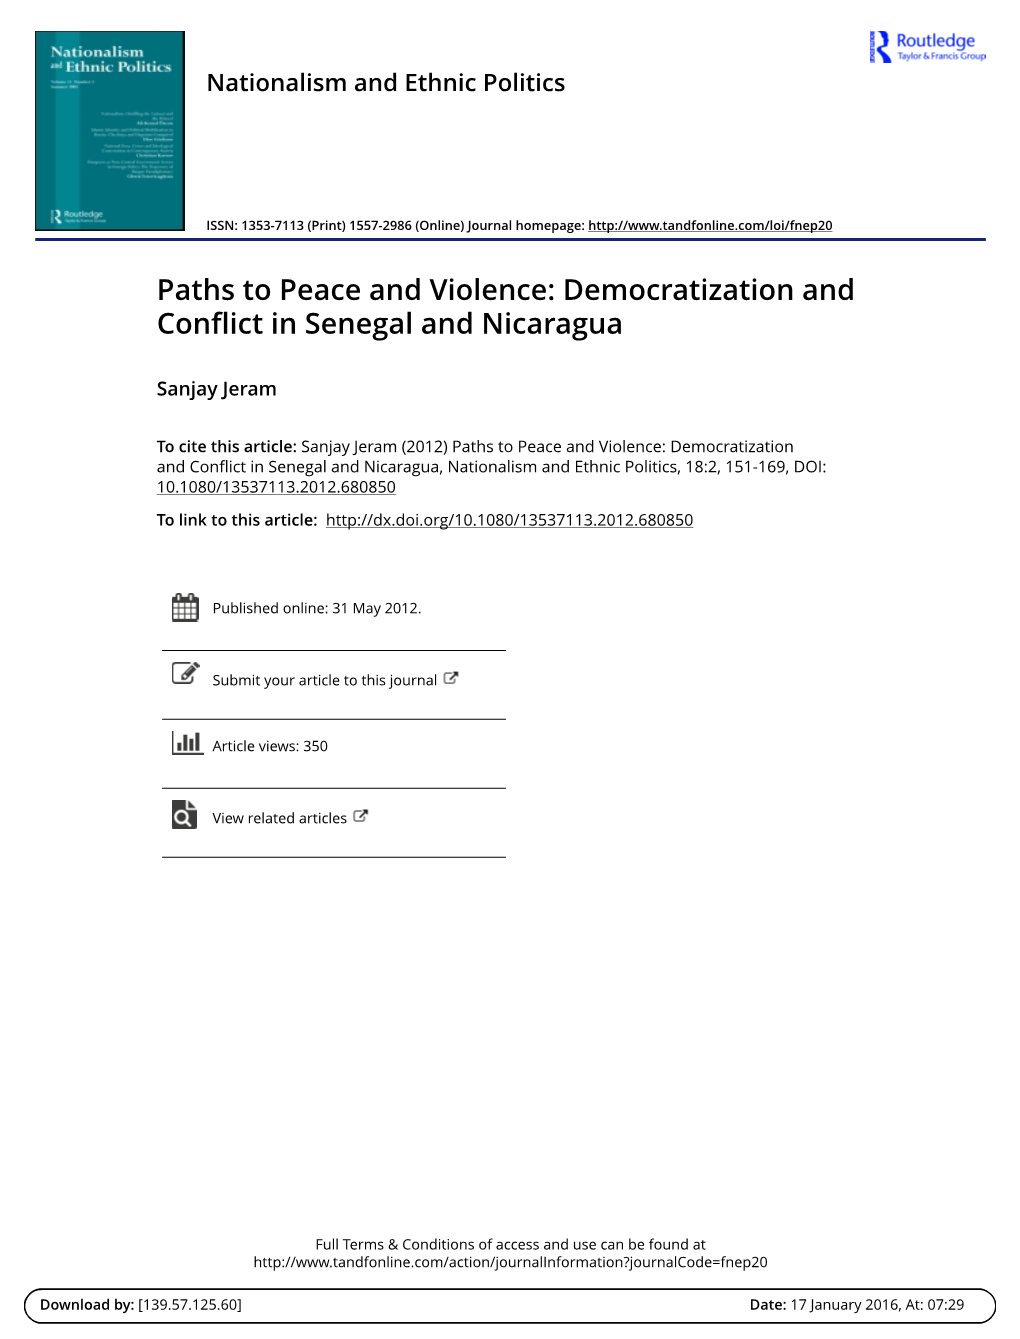 Democratization and Conflict in Senegal and Nicaragua